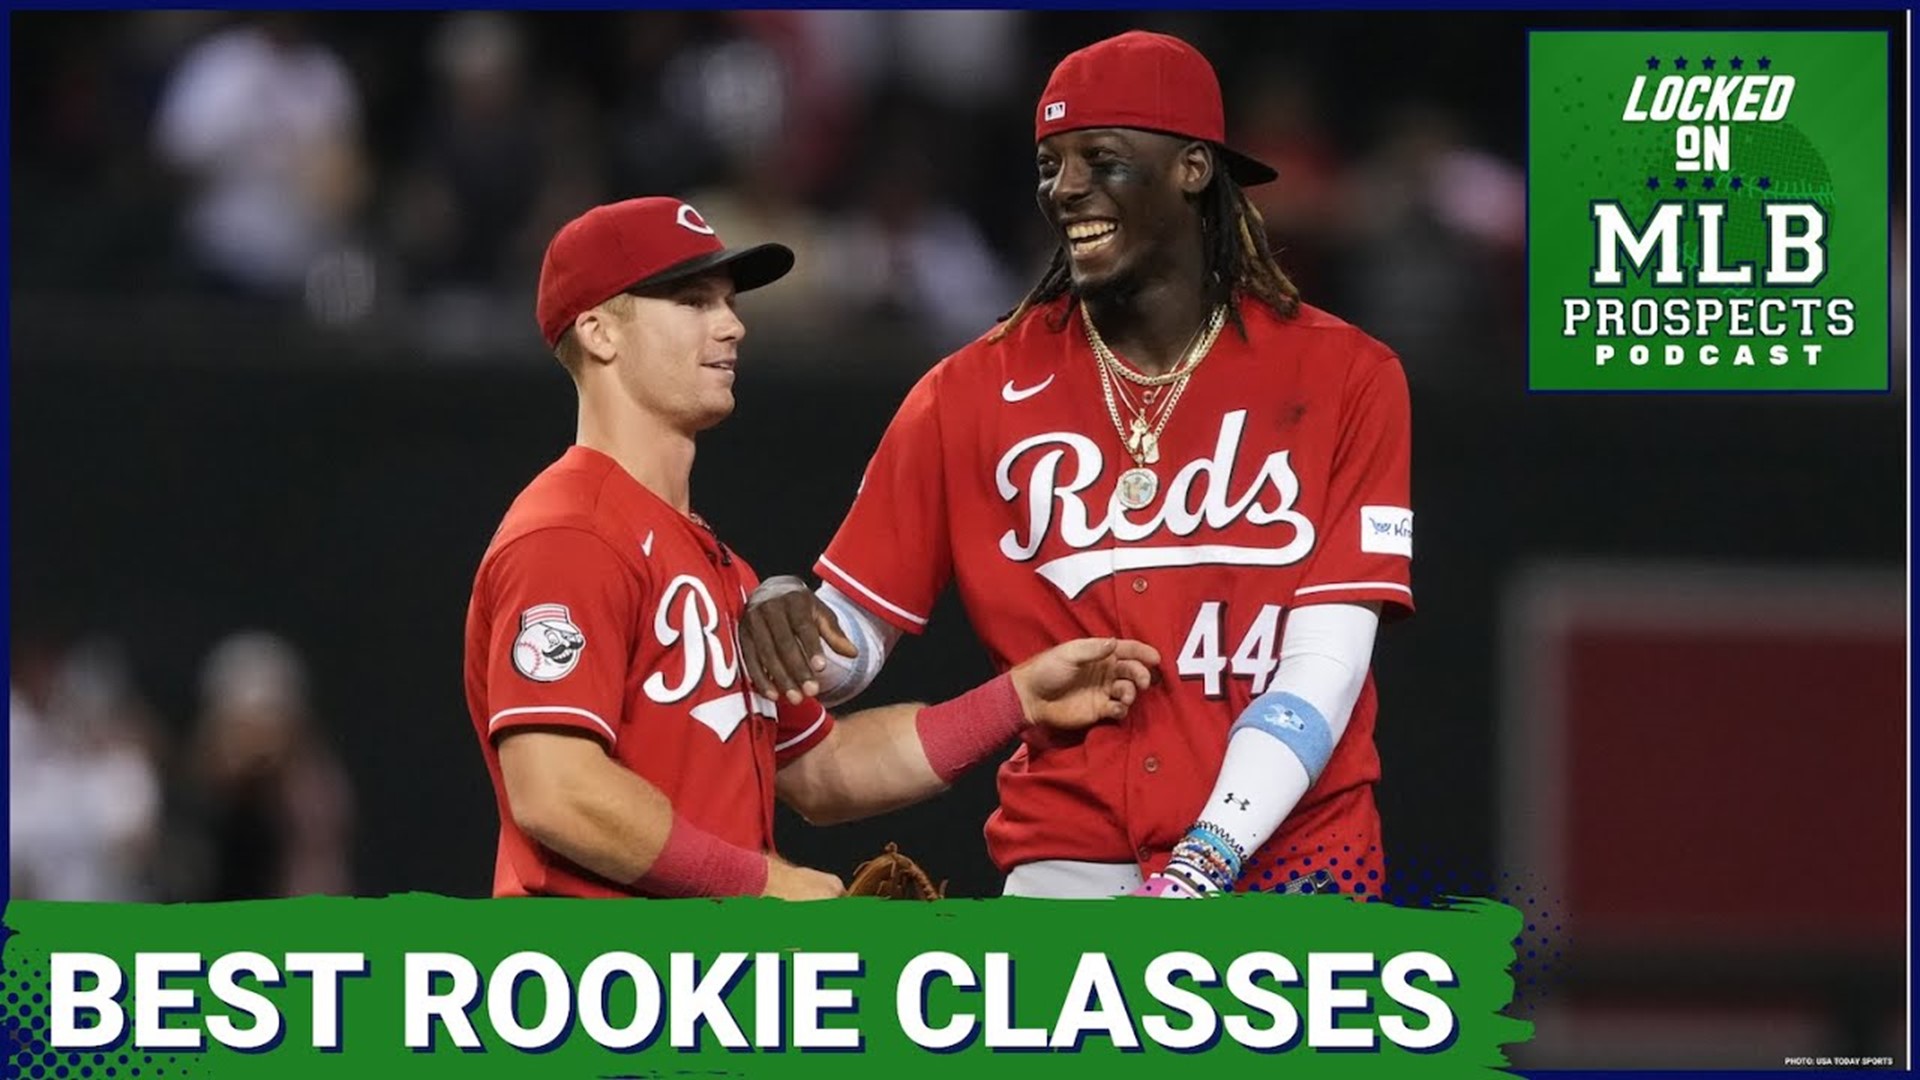 In this episode of Locked On MLB Prospects, host Lindsay Crosby dives headfirst into the exhilarating world of rookie classes in Major League Baseball for the year 2